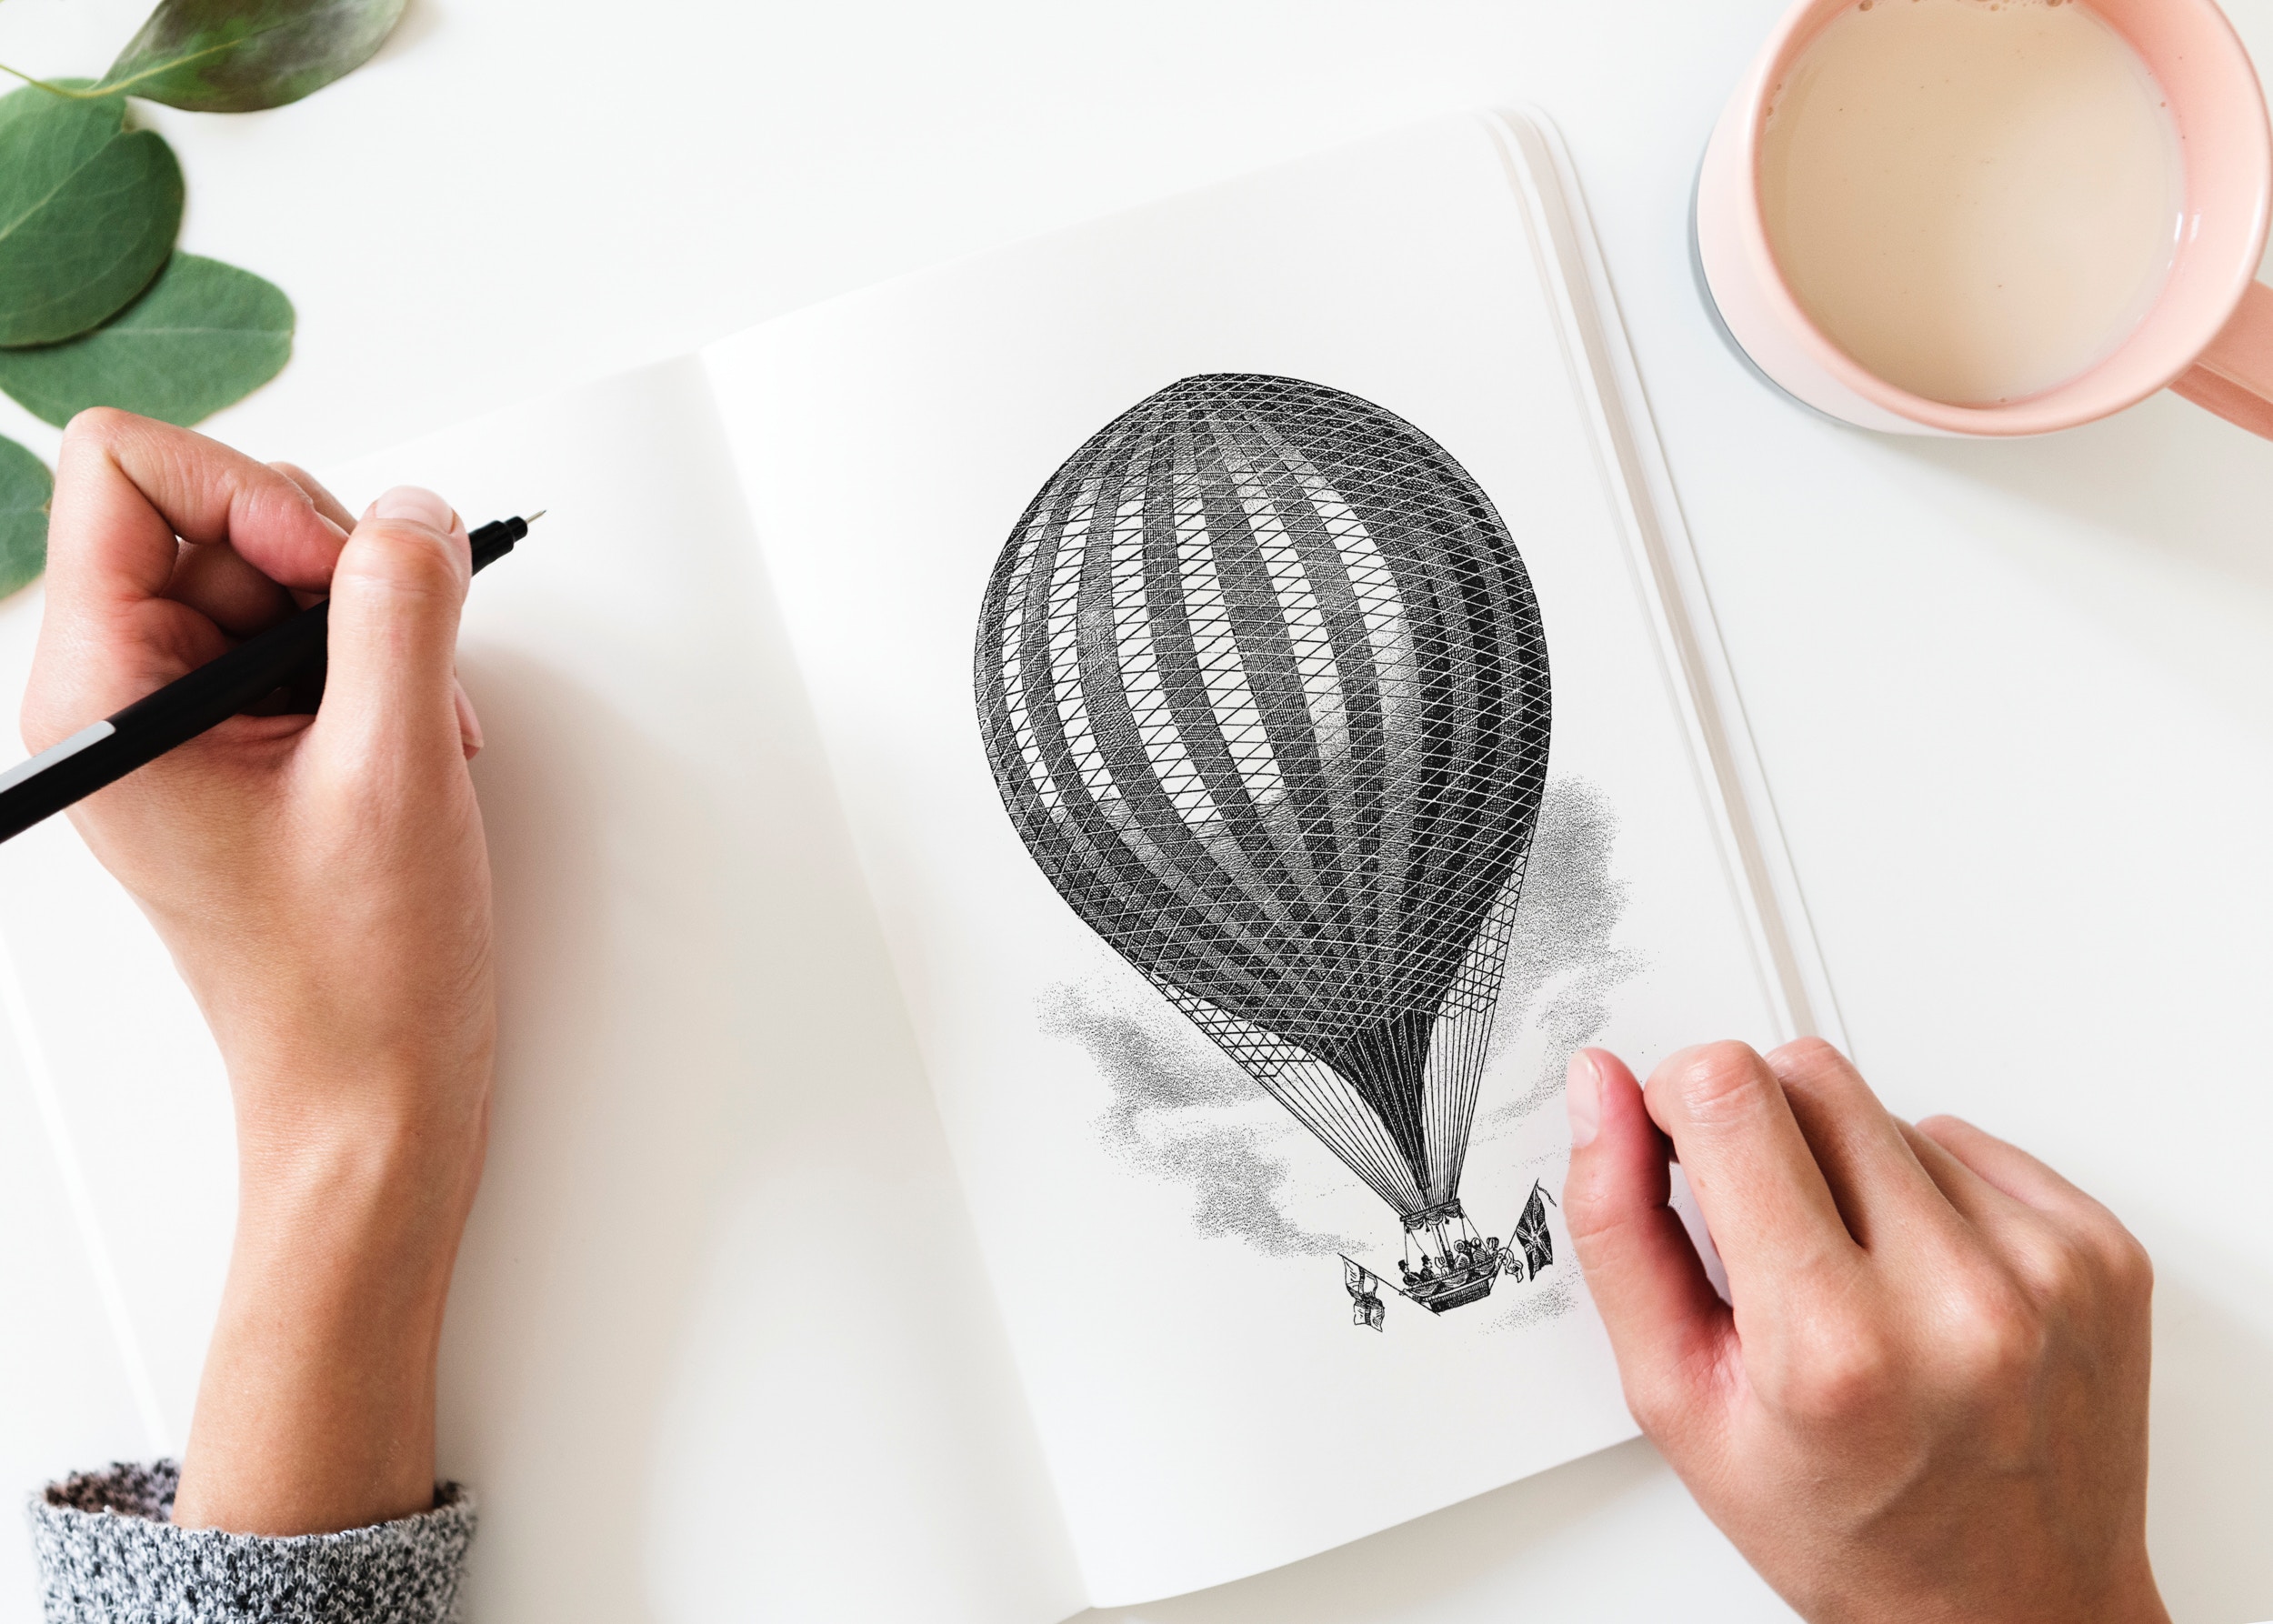 Balloon drawing. Photo by rawpixel on Unsplash